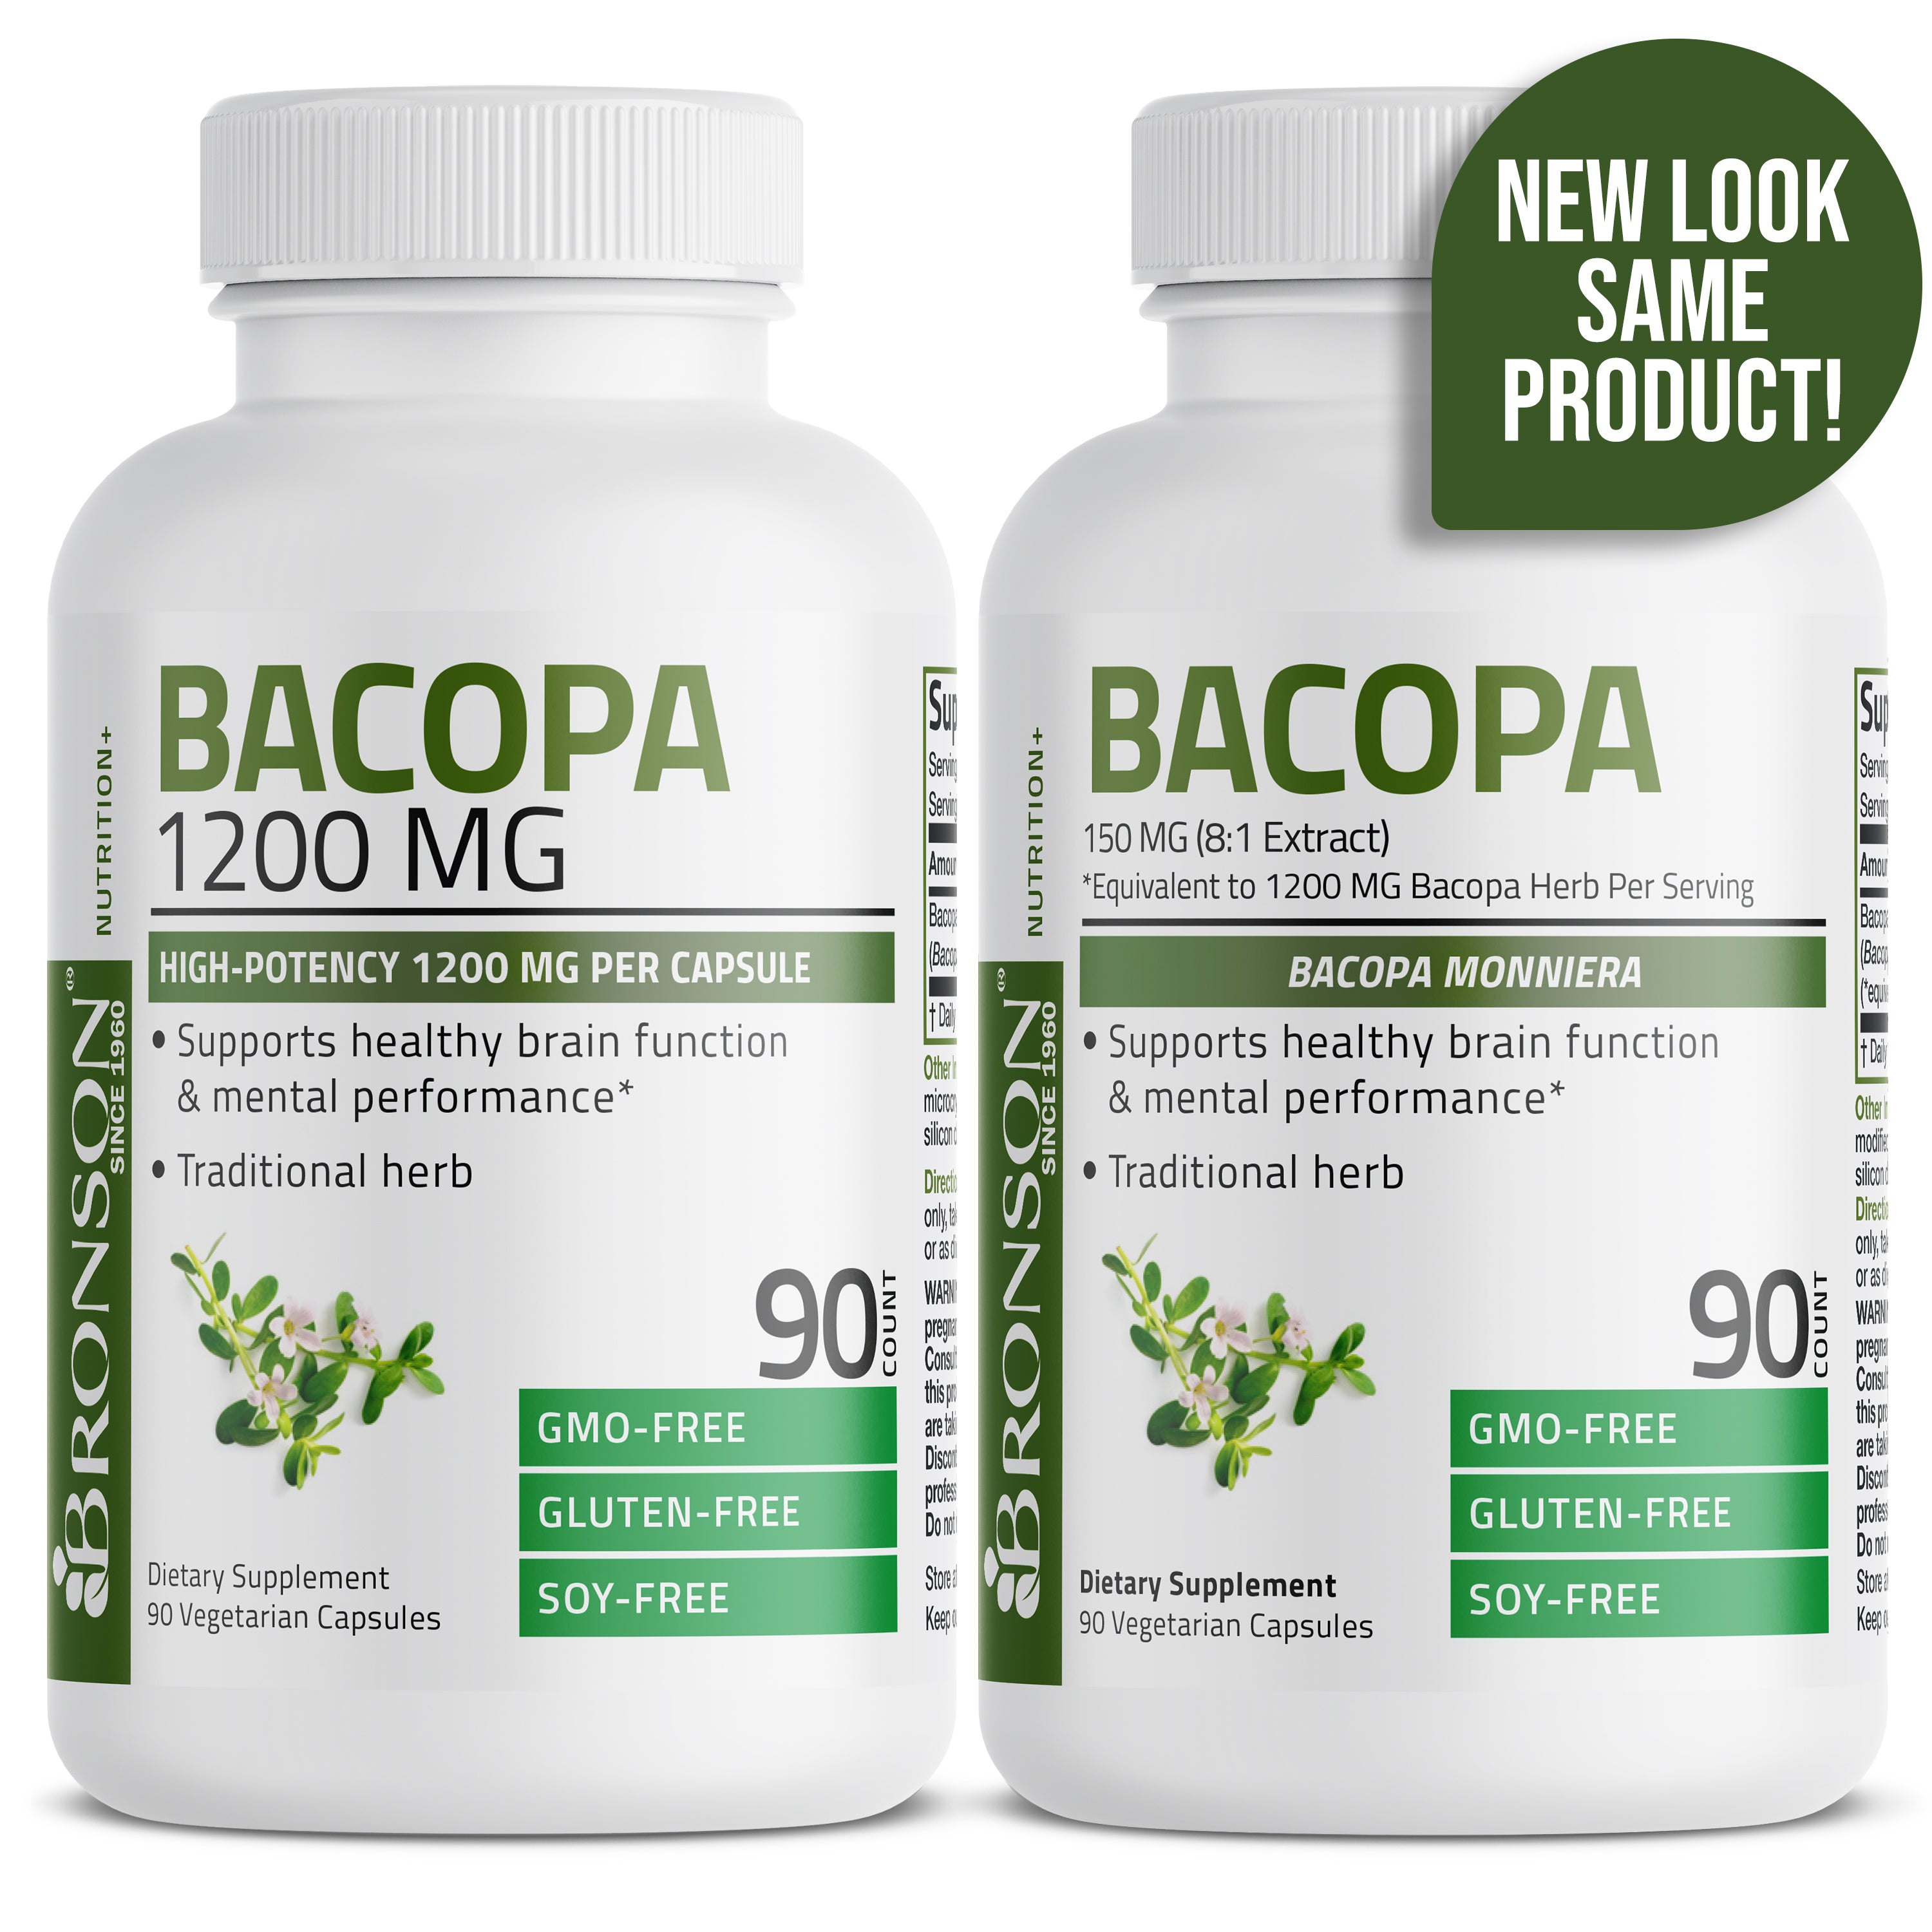 Bacopa 1200 MG view 3 of 7